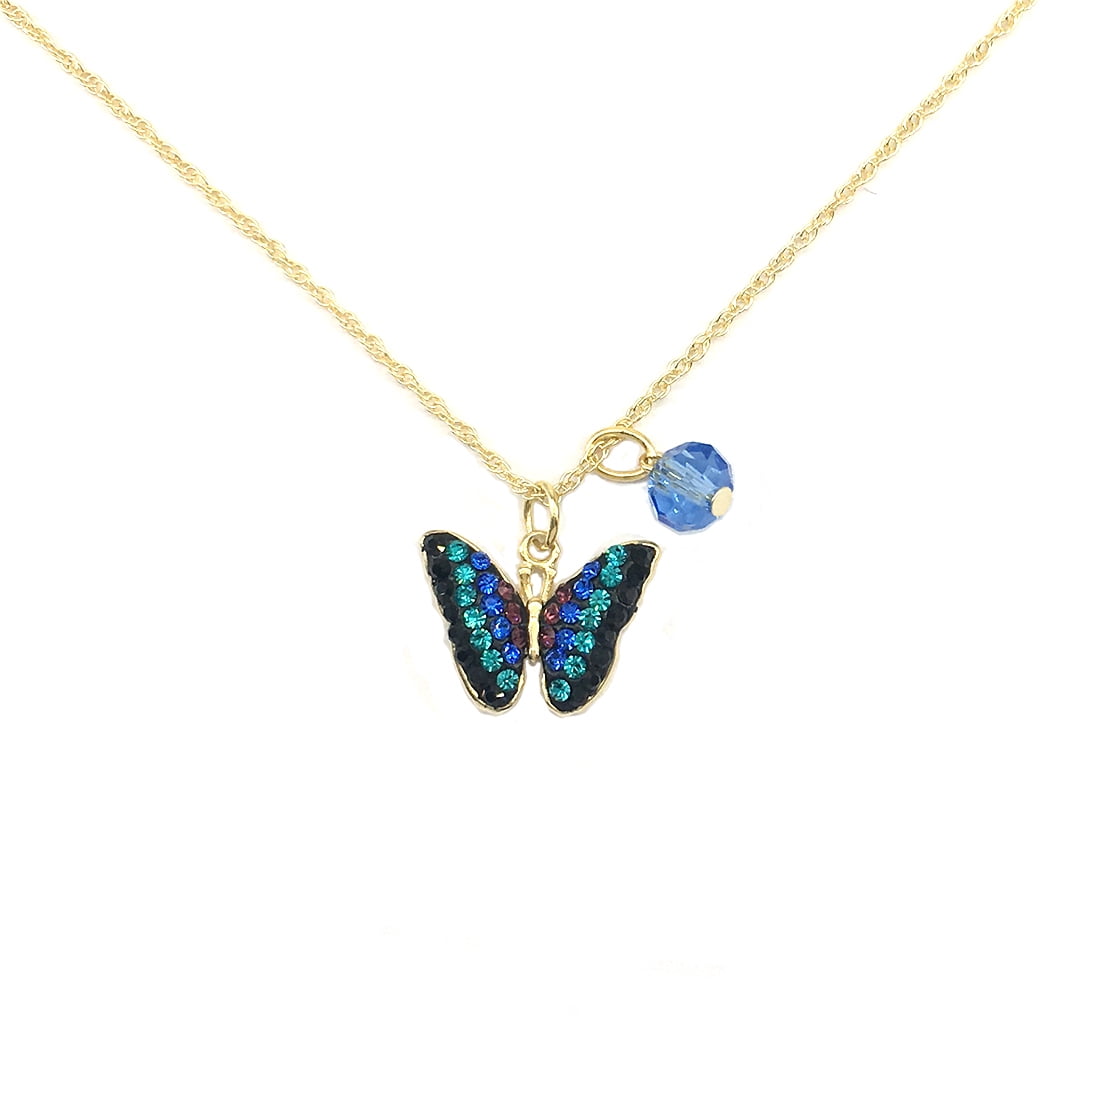 Crystal Pendant Link Chain Jewelry Butterfly Necklace For Women 40% OFF RRP 